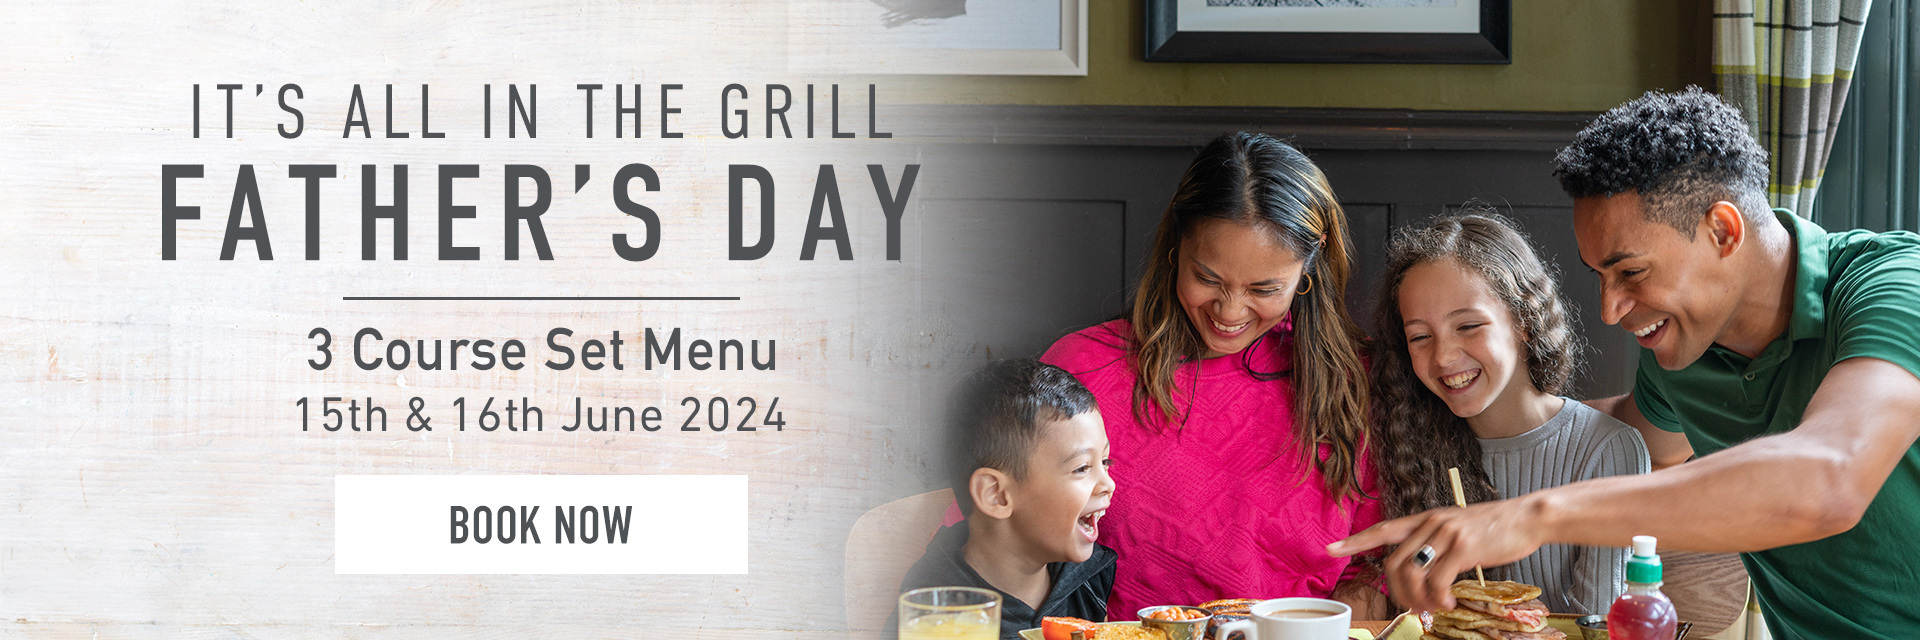 Father’s Day at Harvester Apollo